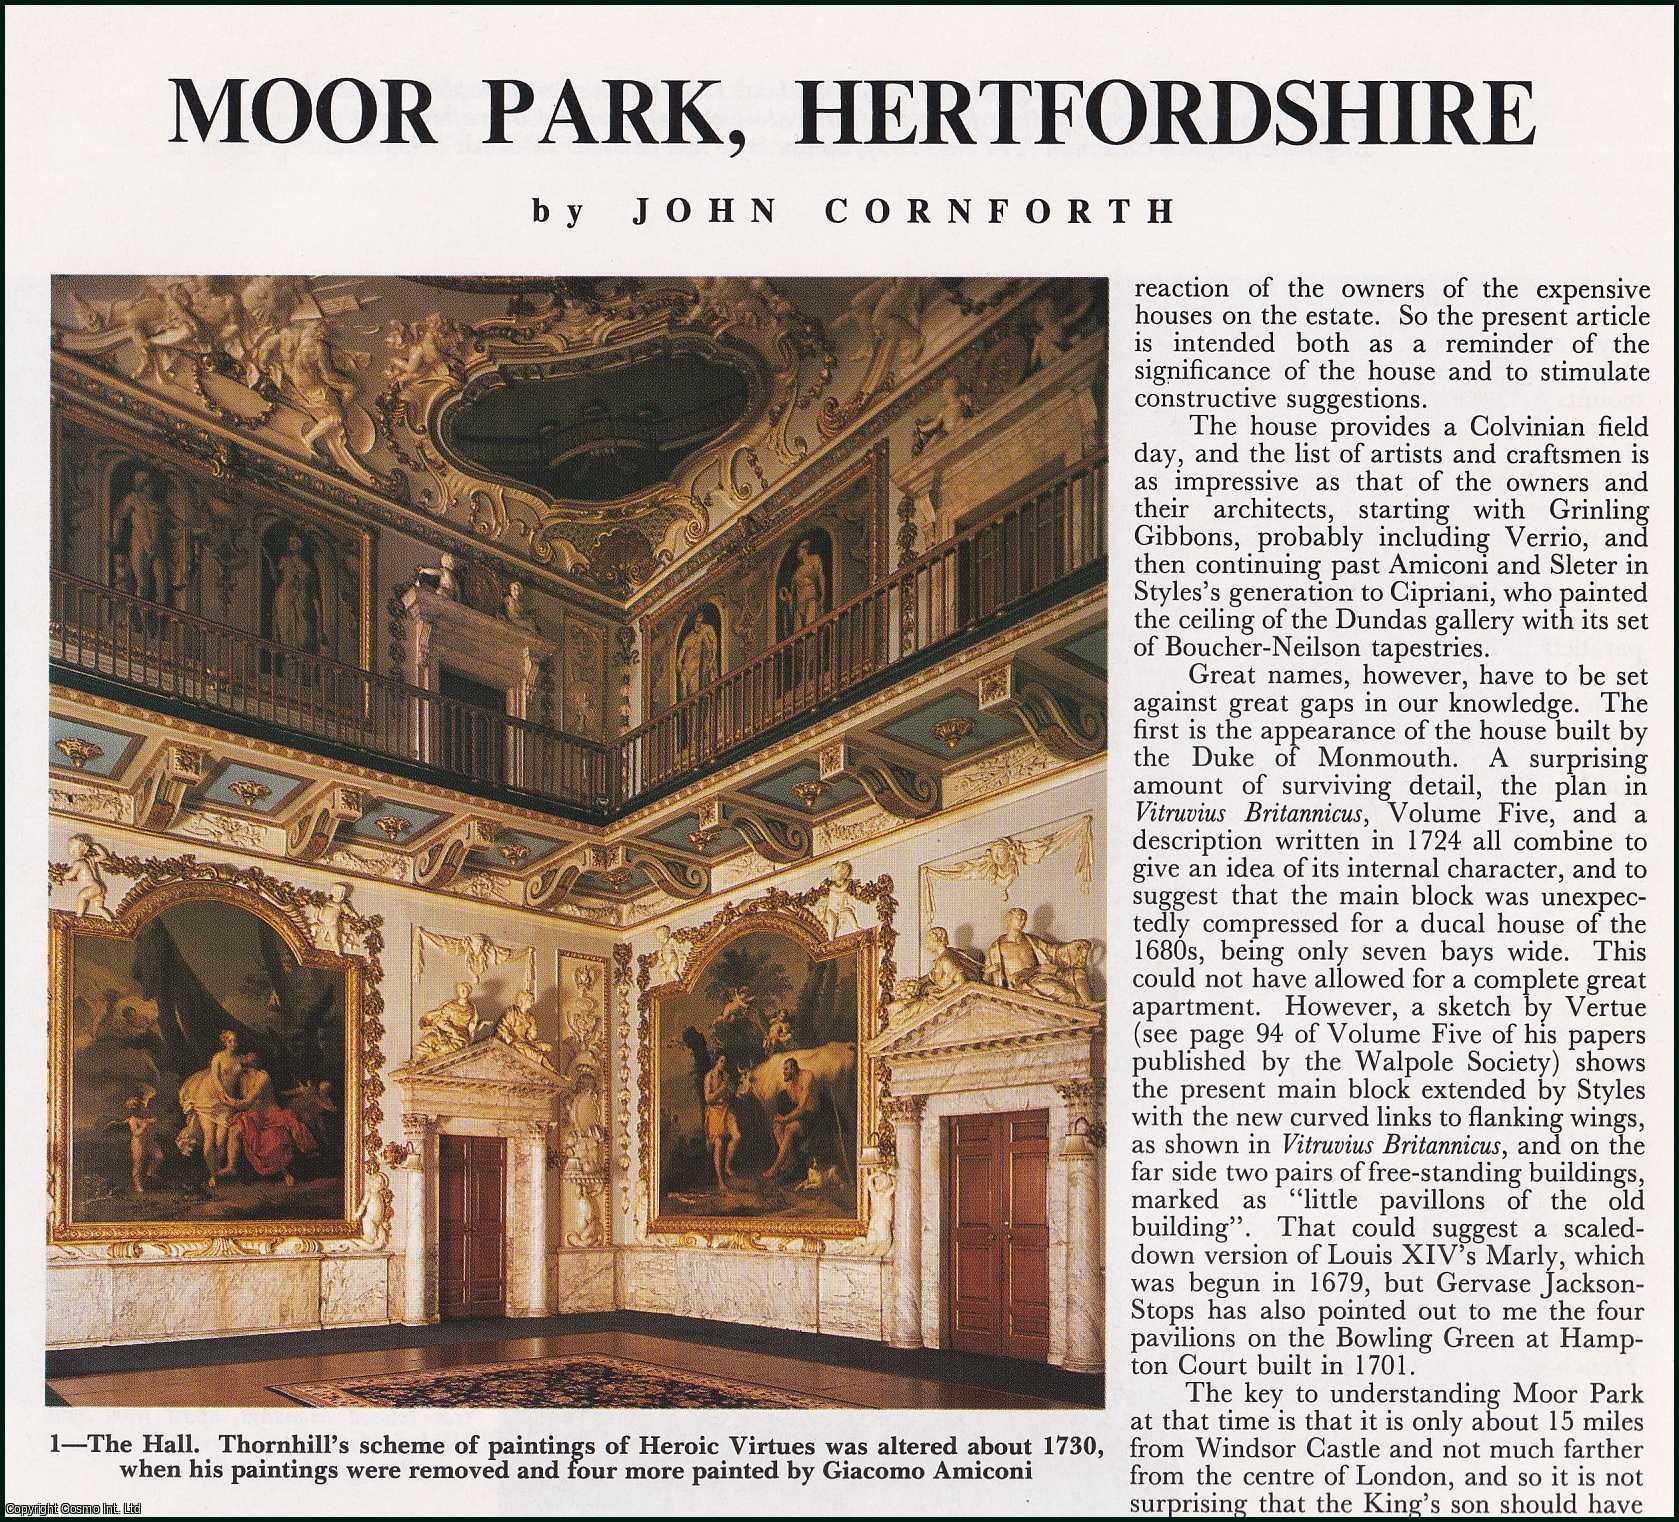 John Cornforth - Moor Park, Hertfordshire. Several pictures and accompanying text, removed from an original issue of Country Life Magazine, 1988.